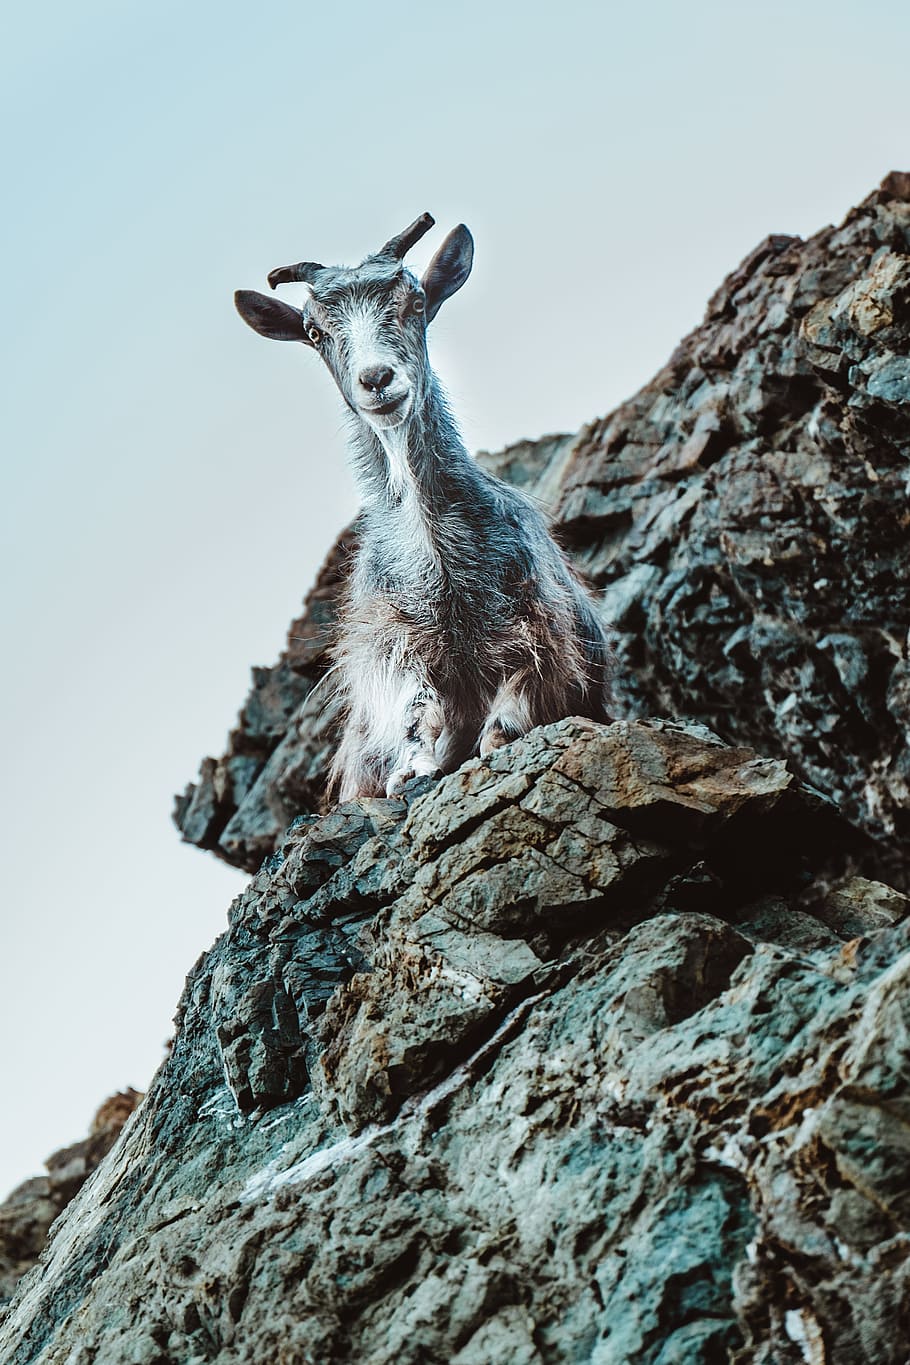 white and gray goat on rock formation at daytime, greece, samothrace, HD wallpaper